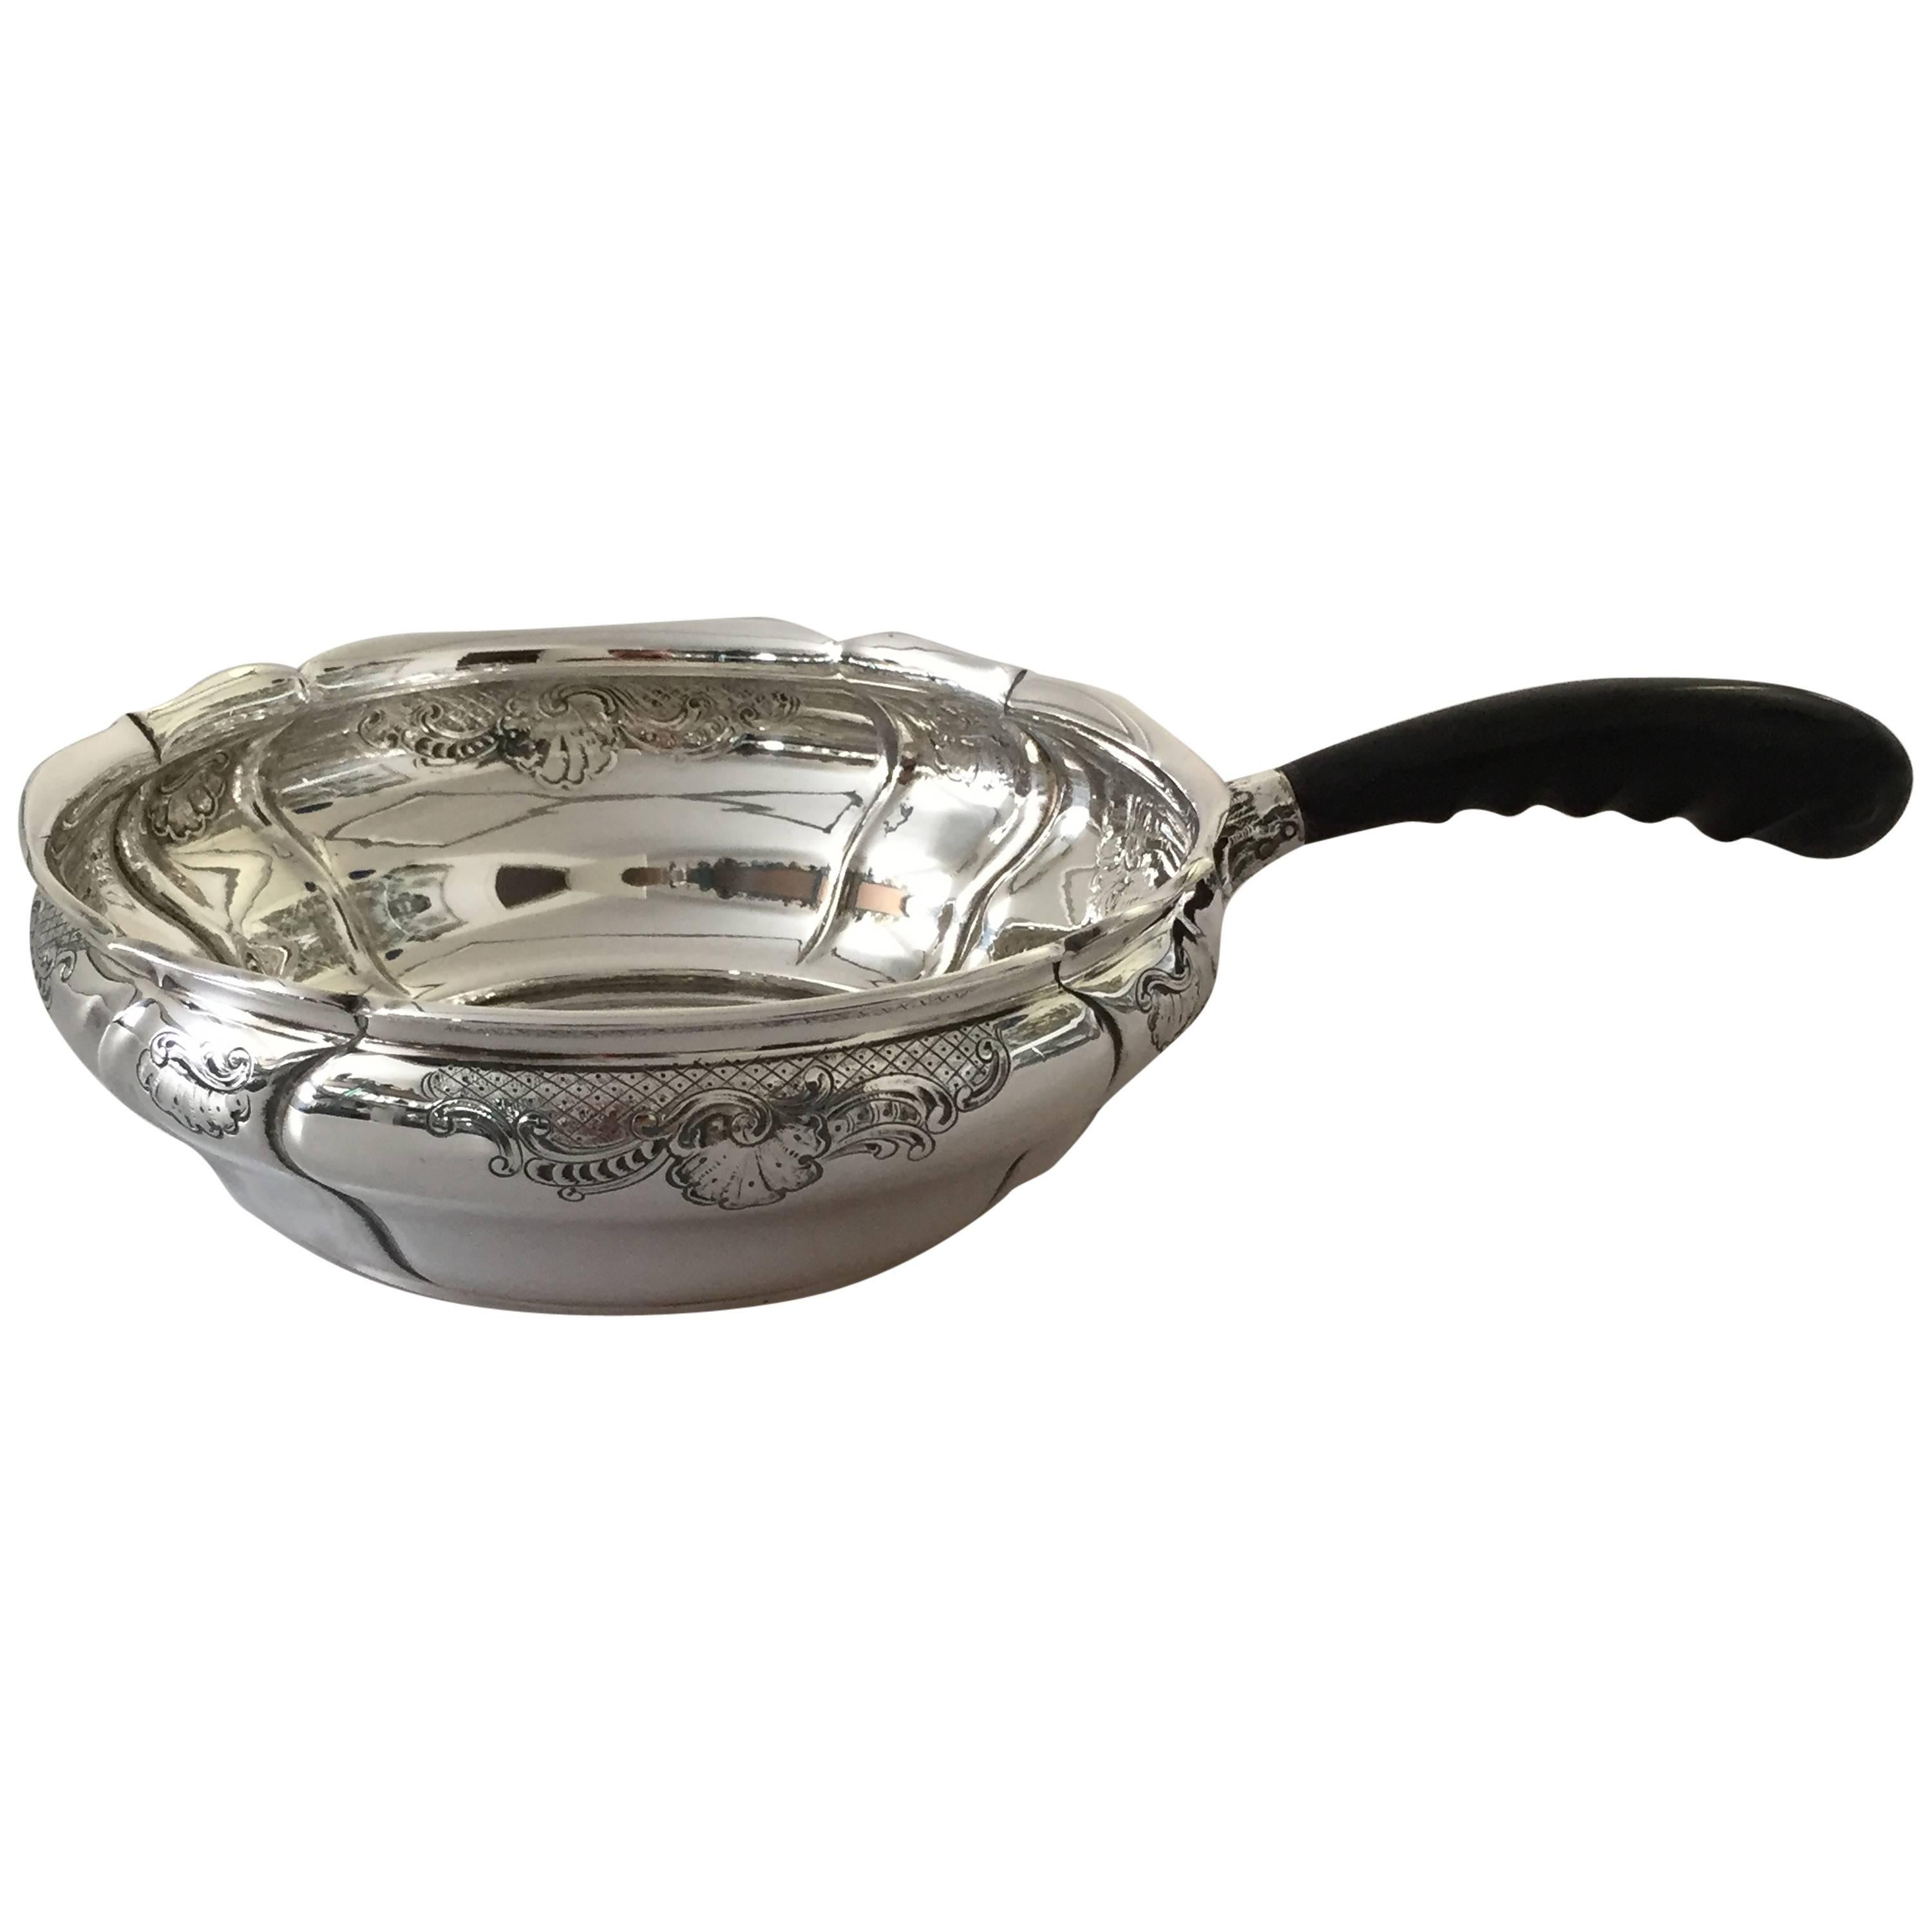 Svend Toxværd Silver Ornamented Sauce Pan with Handle